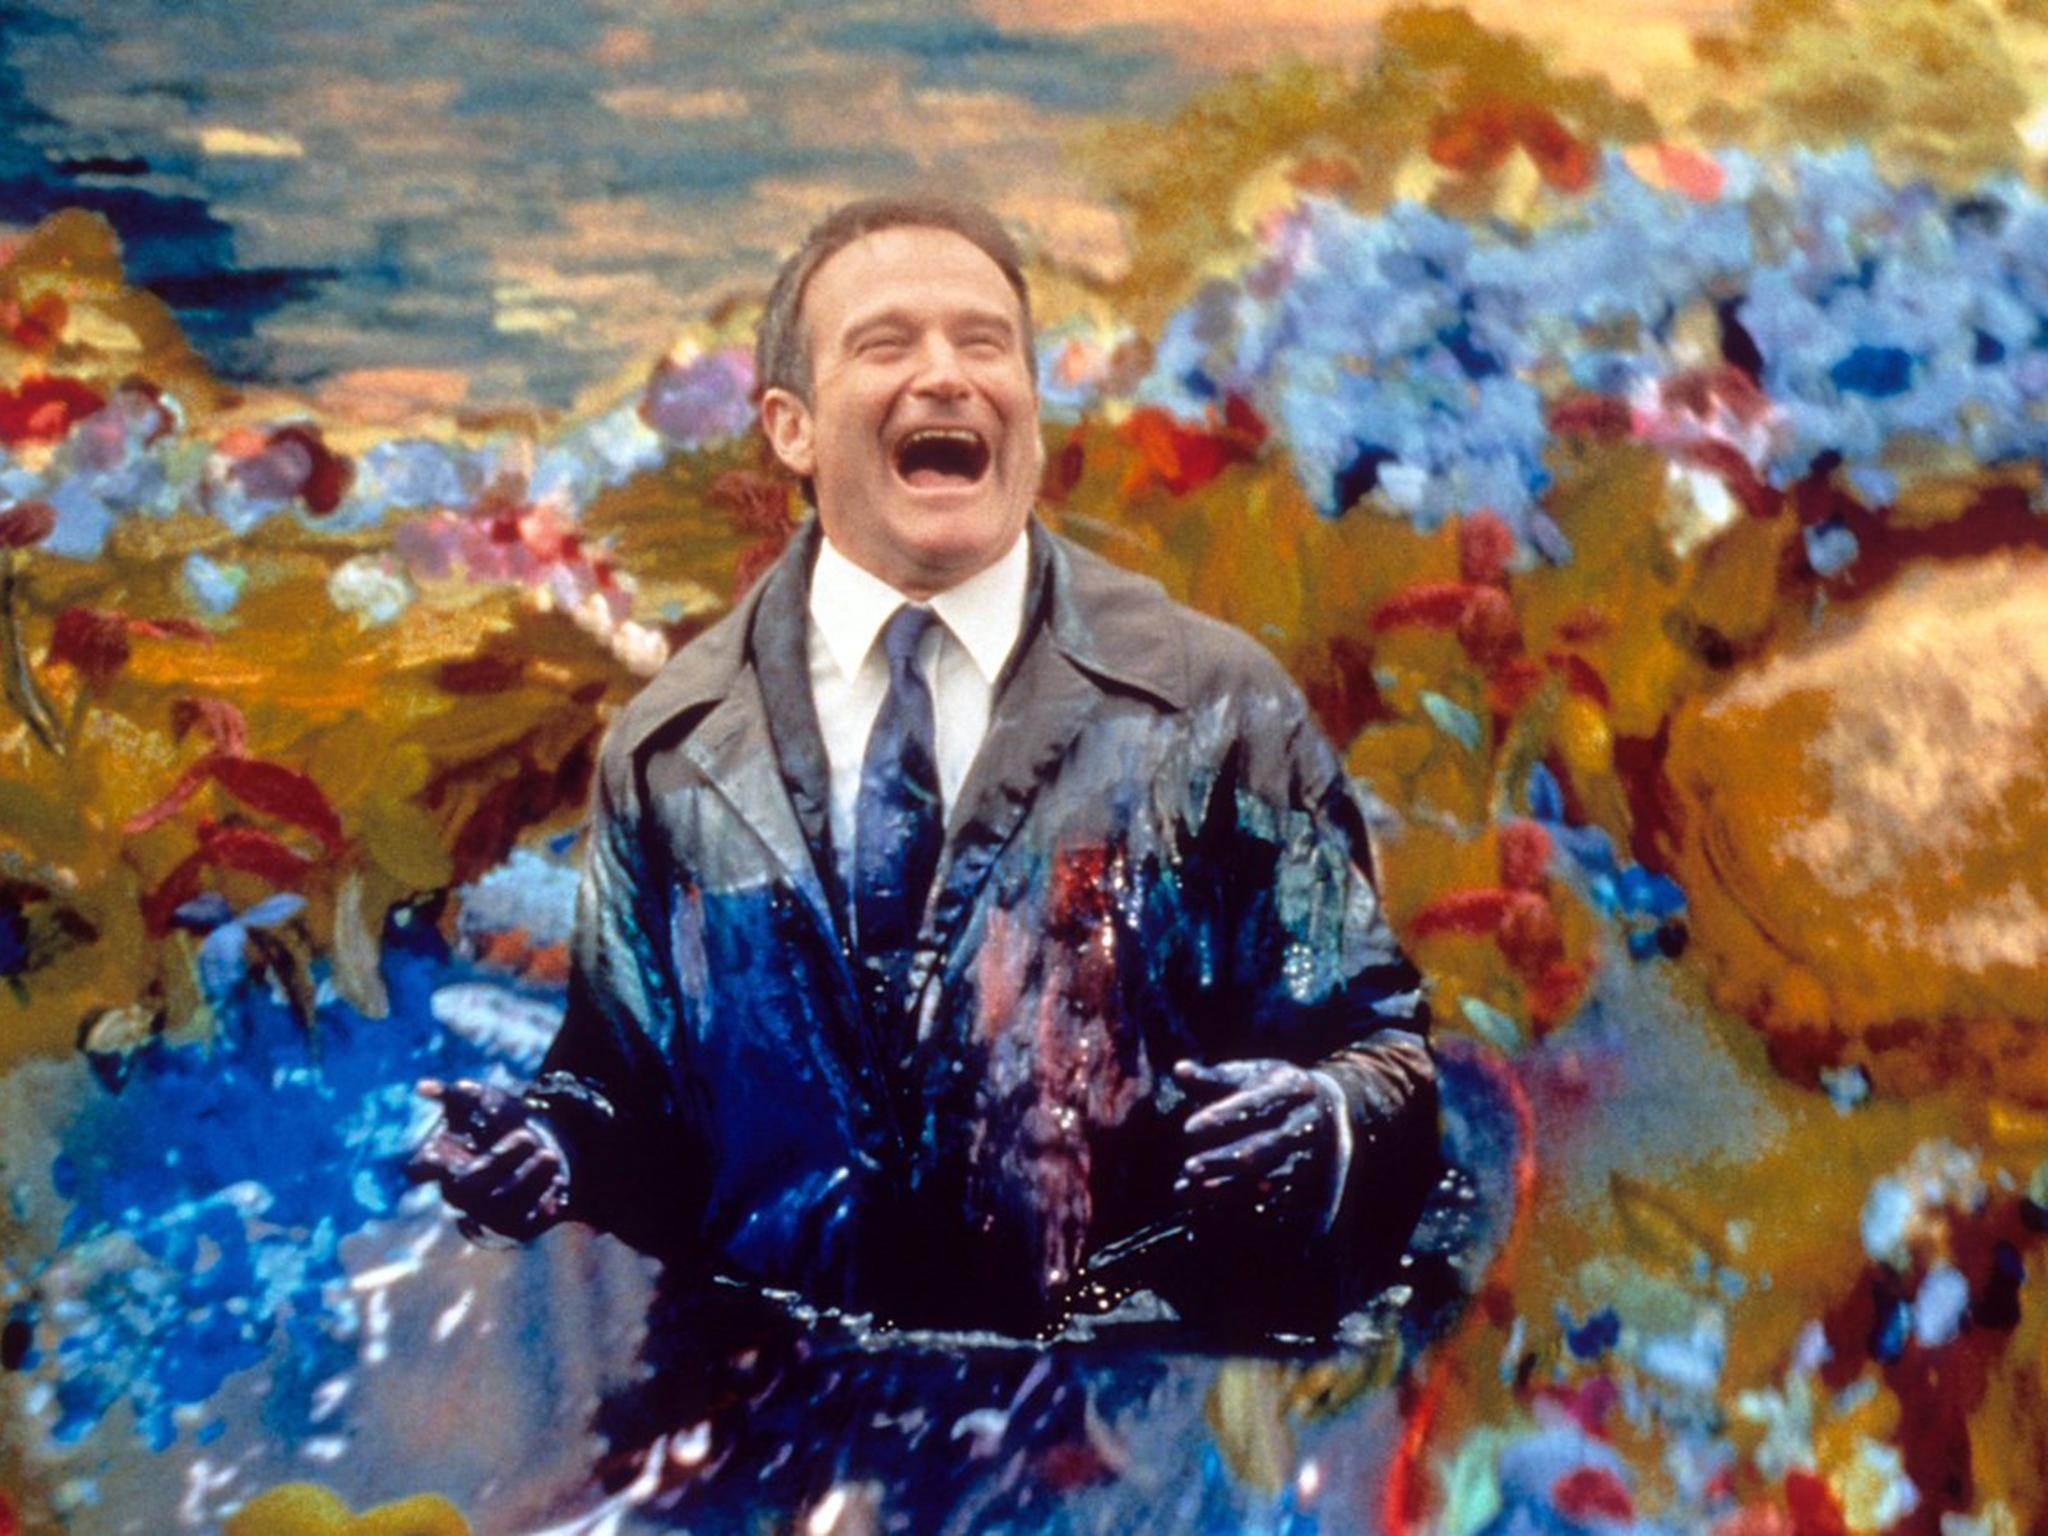 What Dreams May Come, Robin Williams tribute, Impactful performance, Message of hope, 2050x1540 HD Desktop